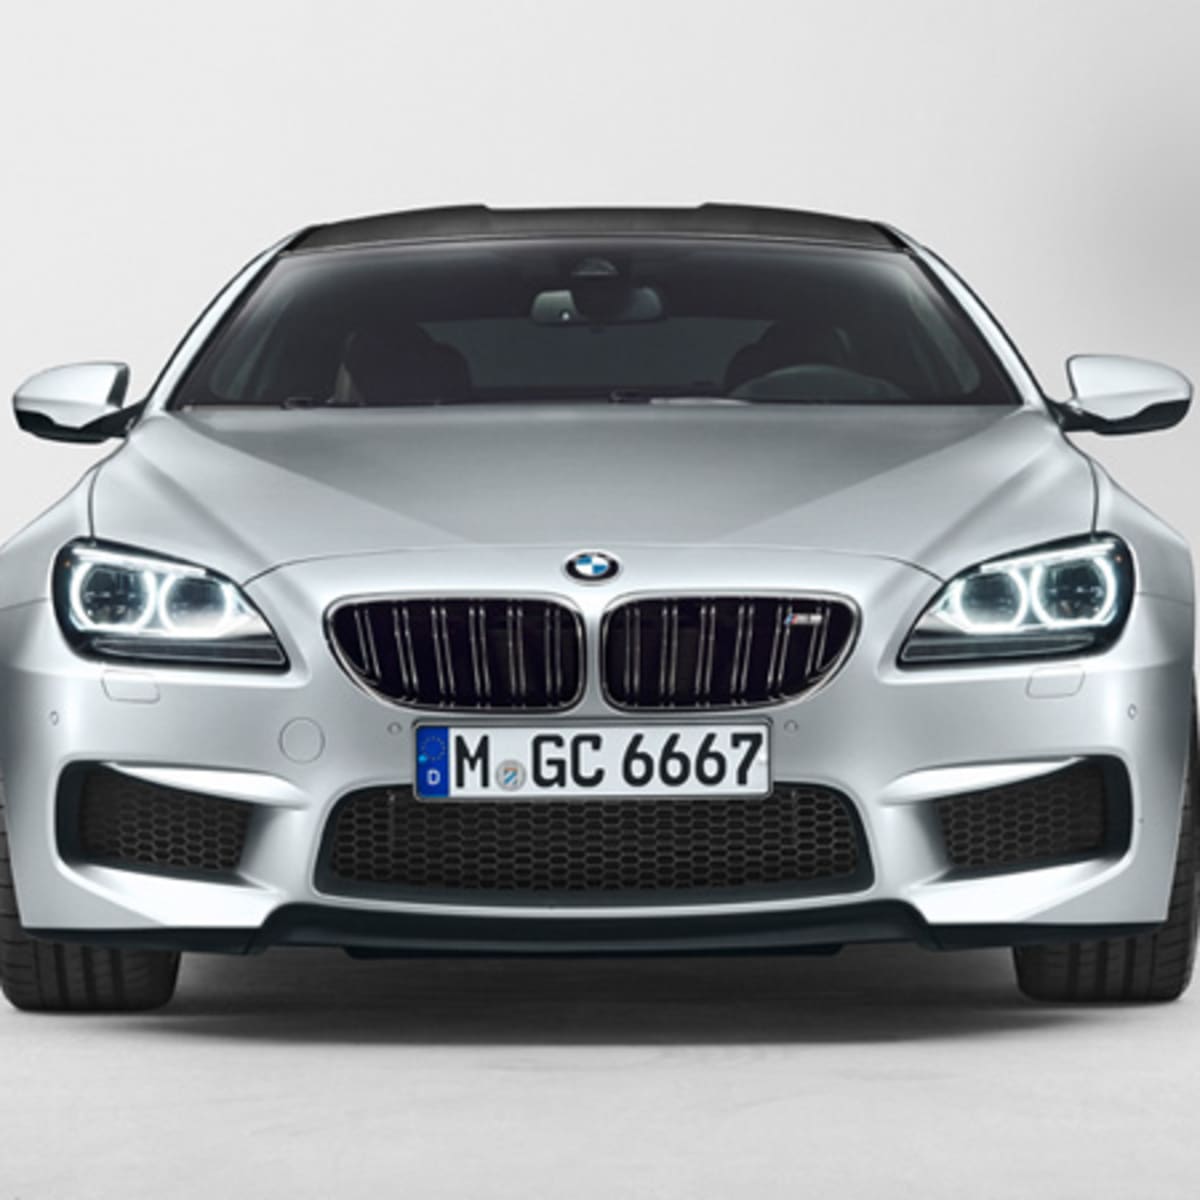 2014 BMW M6 Gran Coupe - "V8 With M TwinPower Turbo Technology" - Freshness  Mag